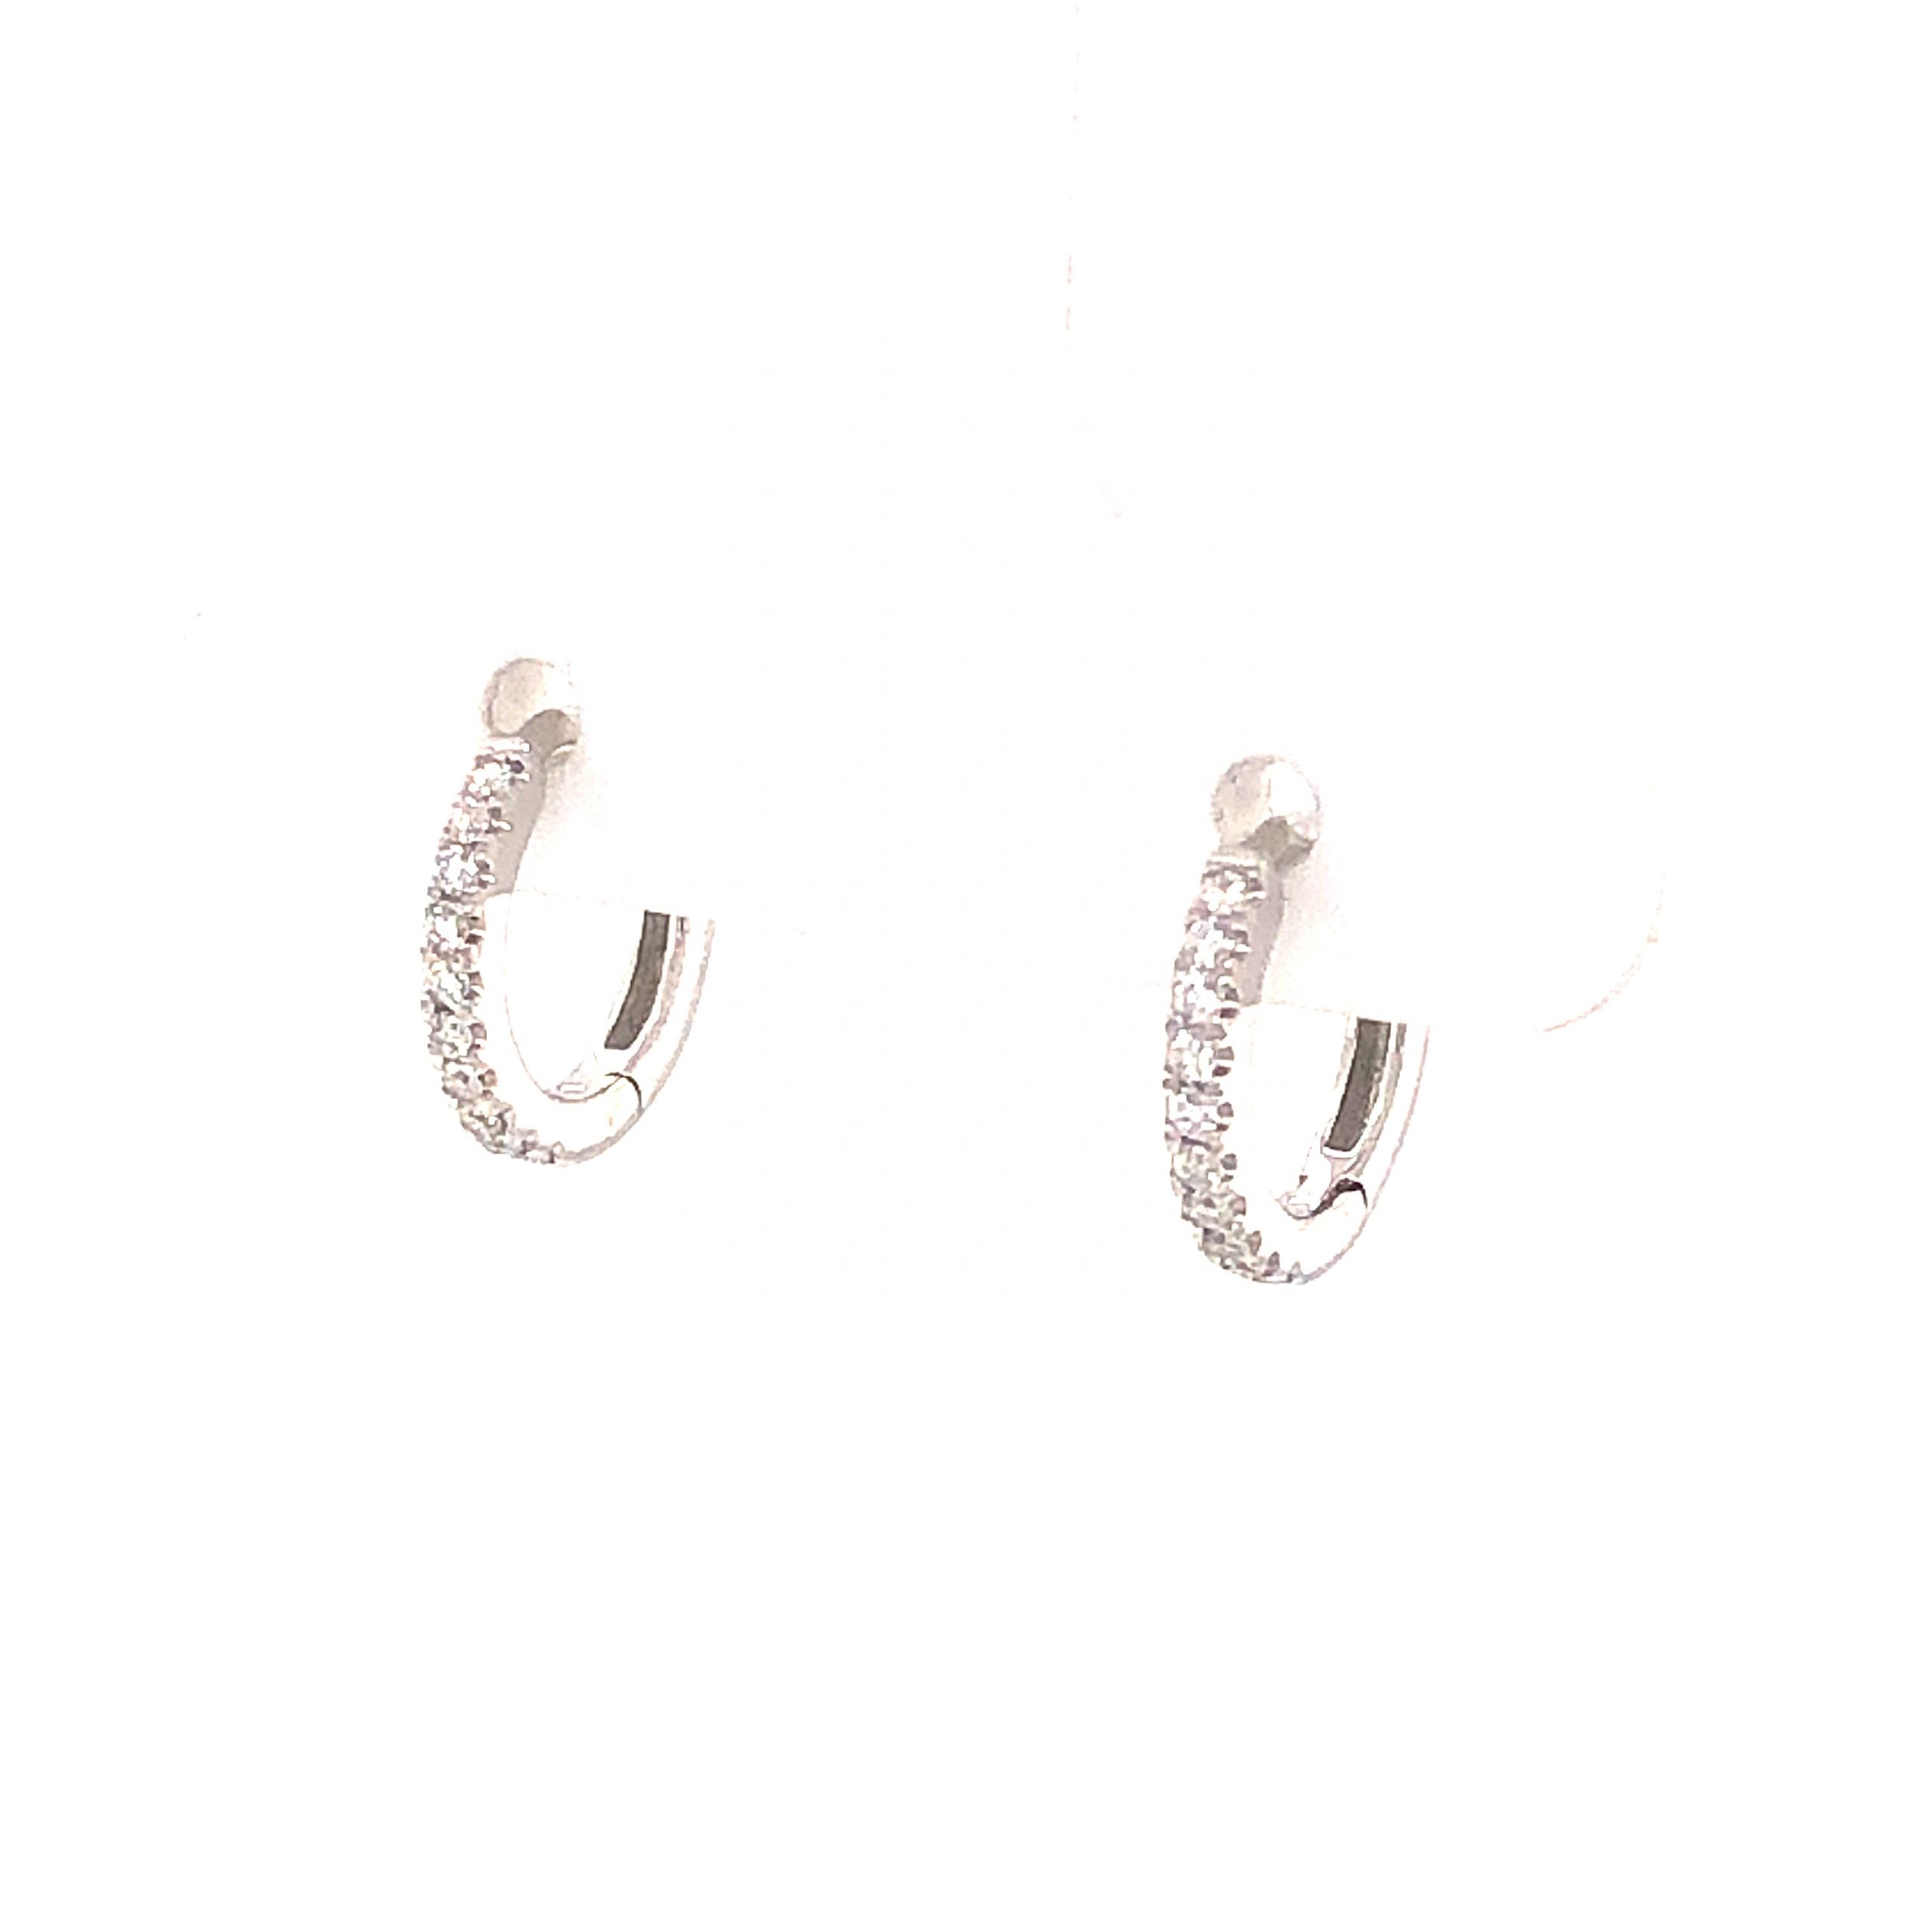 12 mm white gold hoop earrings small, 585 gold, real gold earrings mini,  men gold hoop earrings, unisex earrings nickel free - 2987 - Love Your  Diamonds